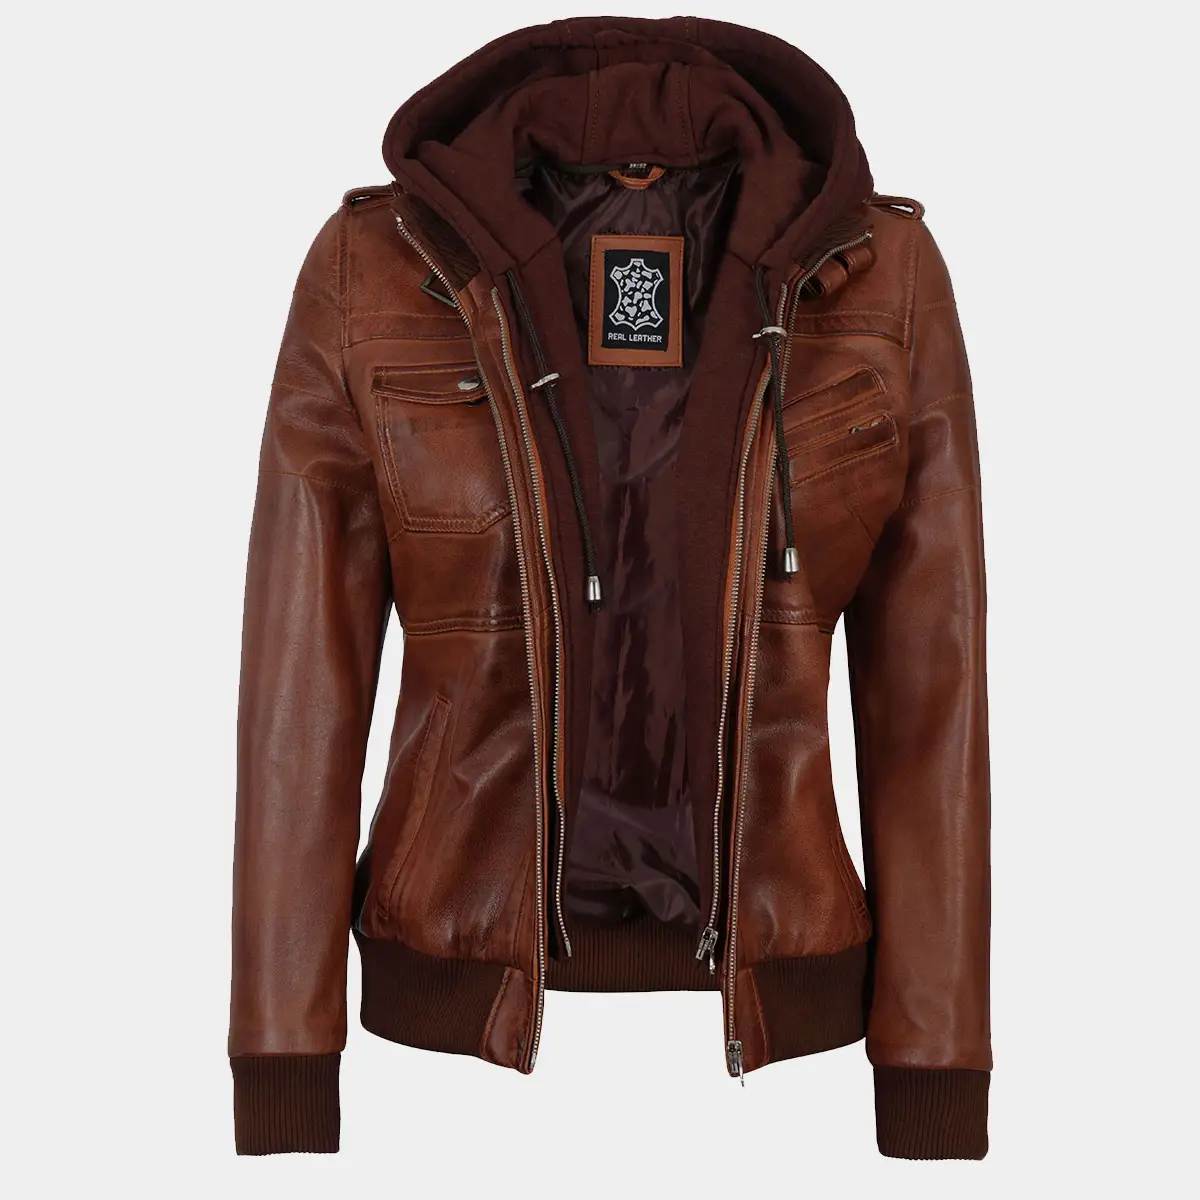 Cognac Leather Jacket with Removable Hood